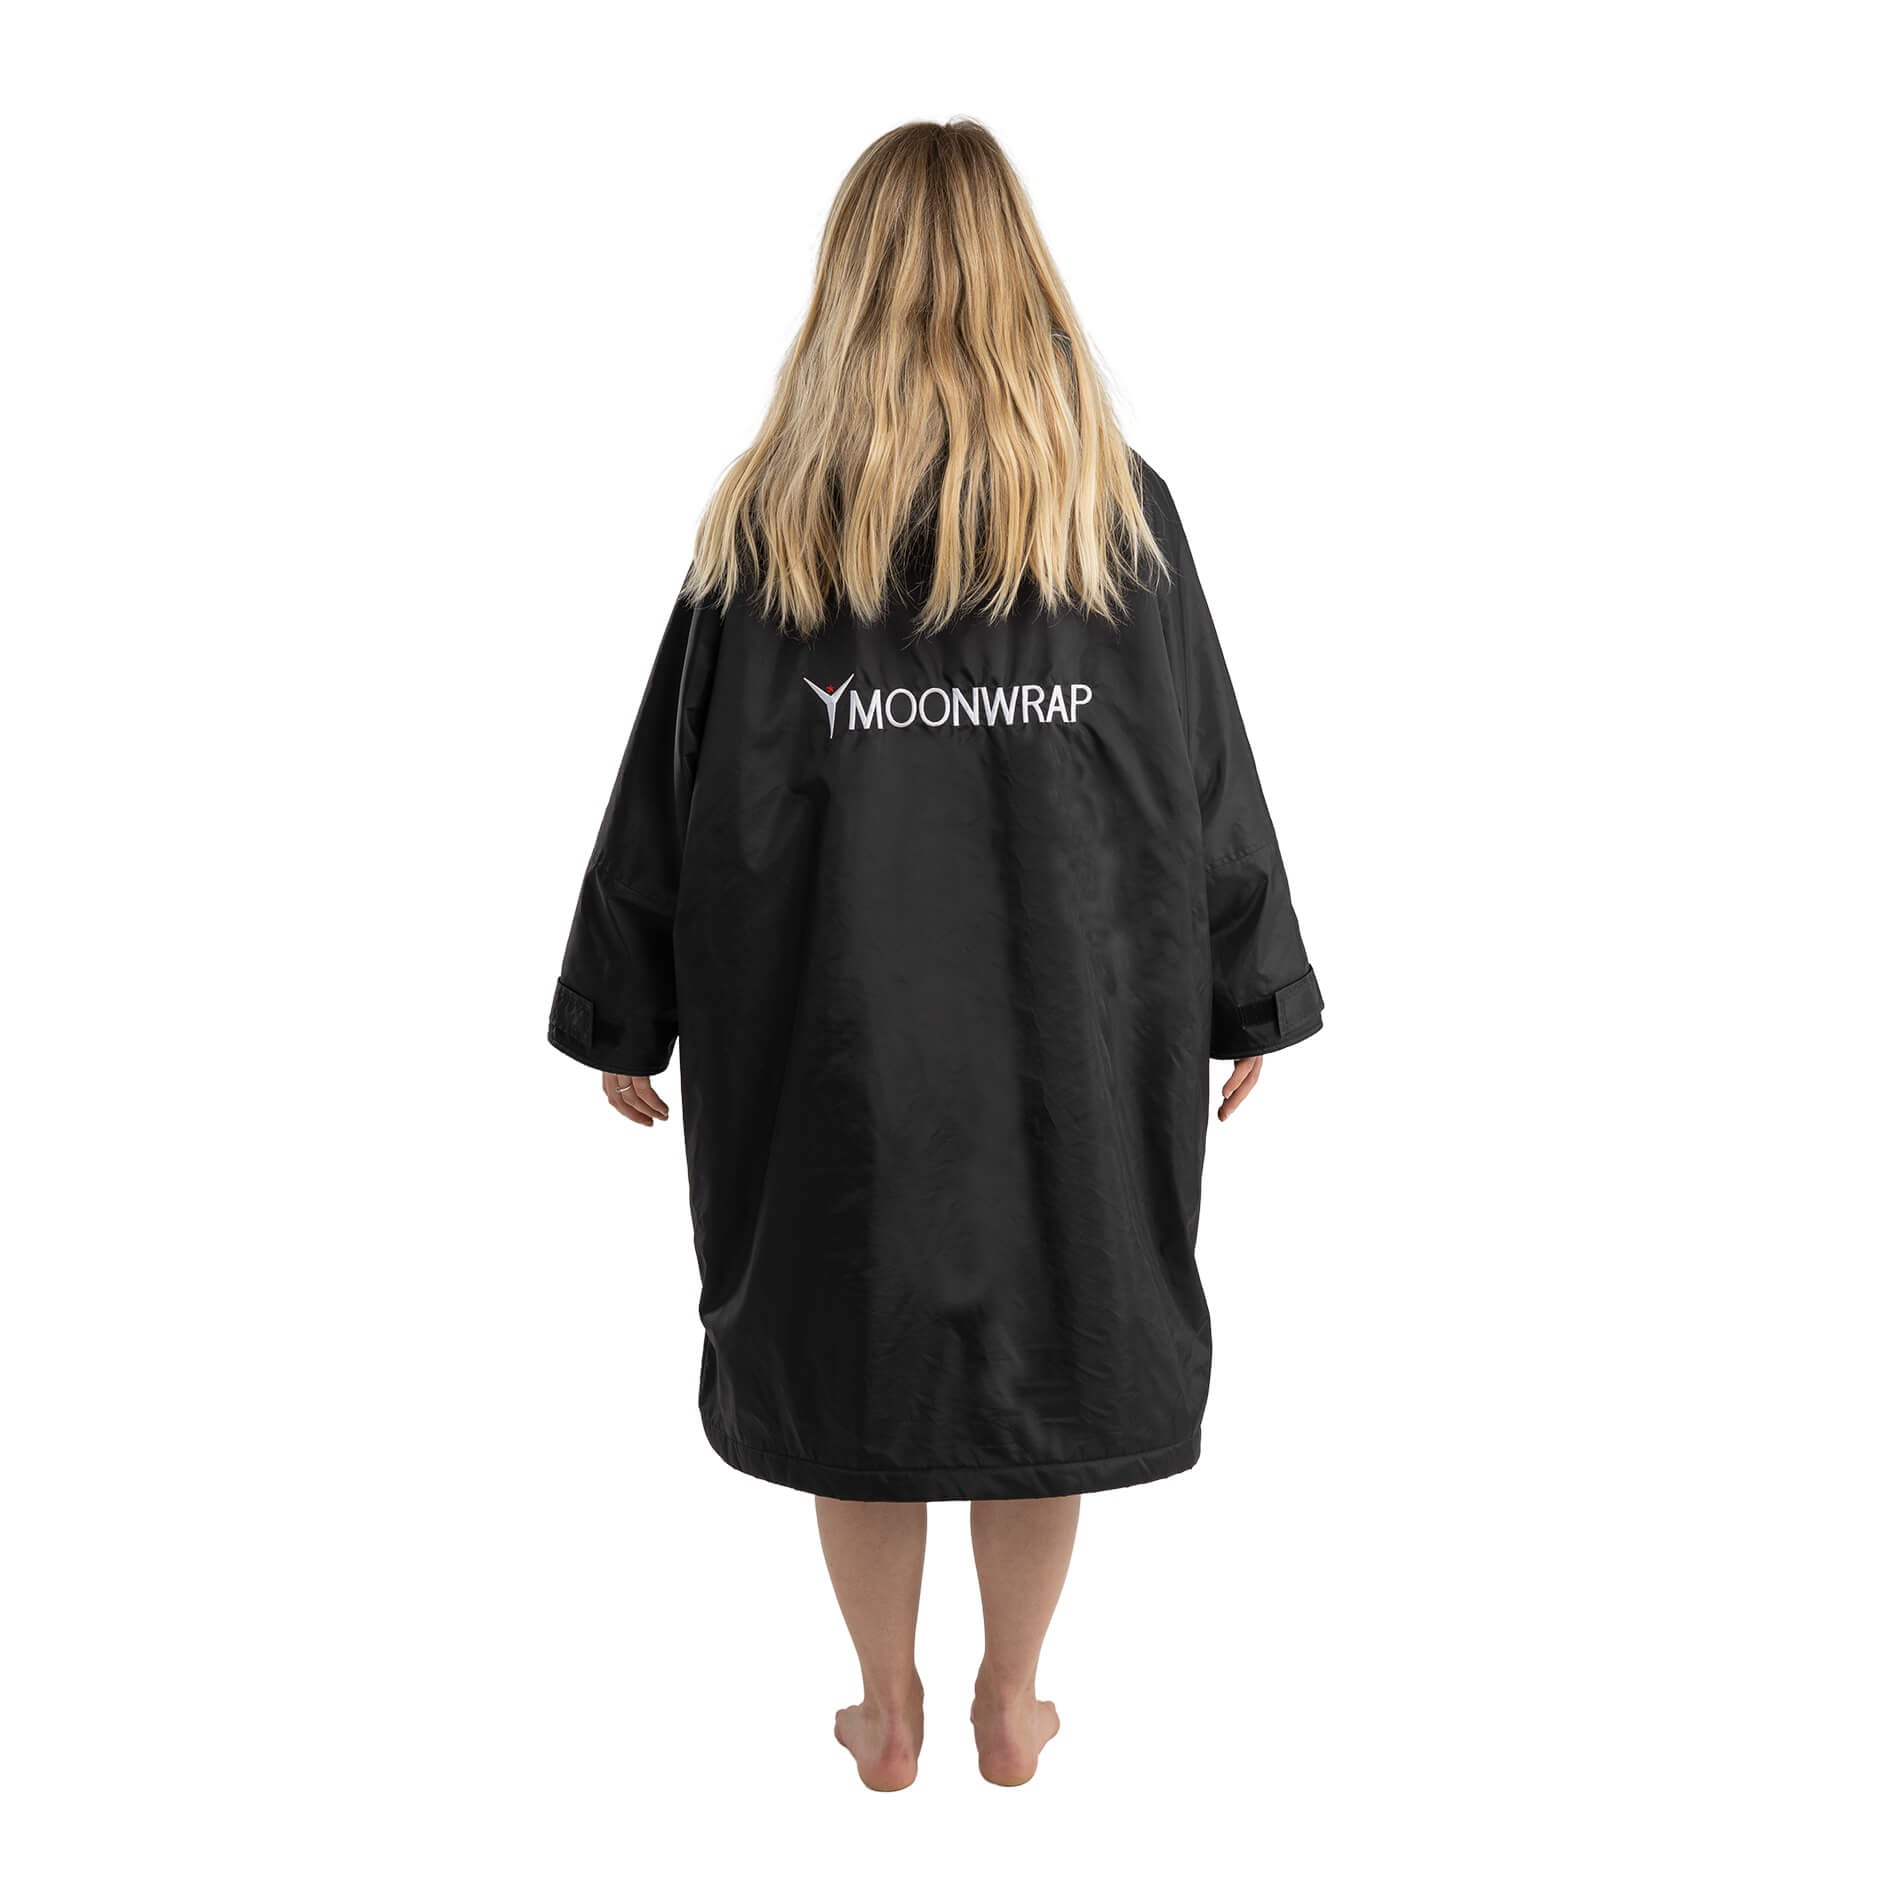 The back of a Woman wearing the Full length photo of a Woman in the Black Frostfire Moonwrap Waterproof Changing Robe for Cold Water Swimming.